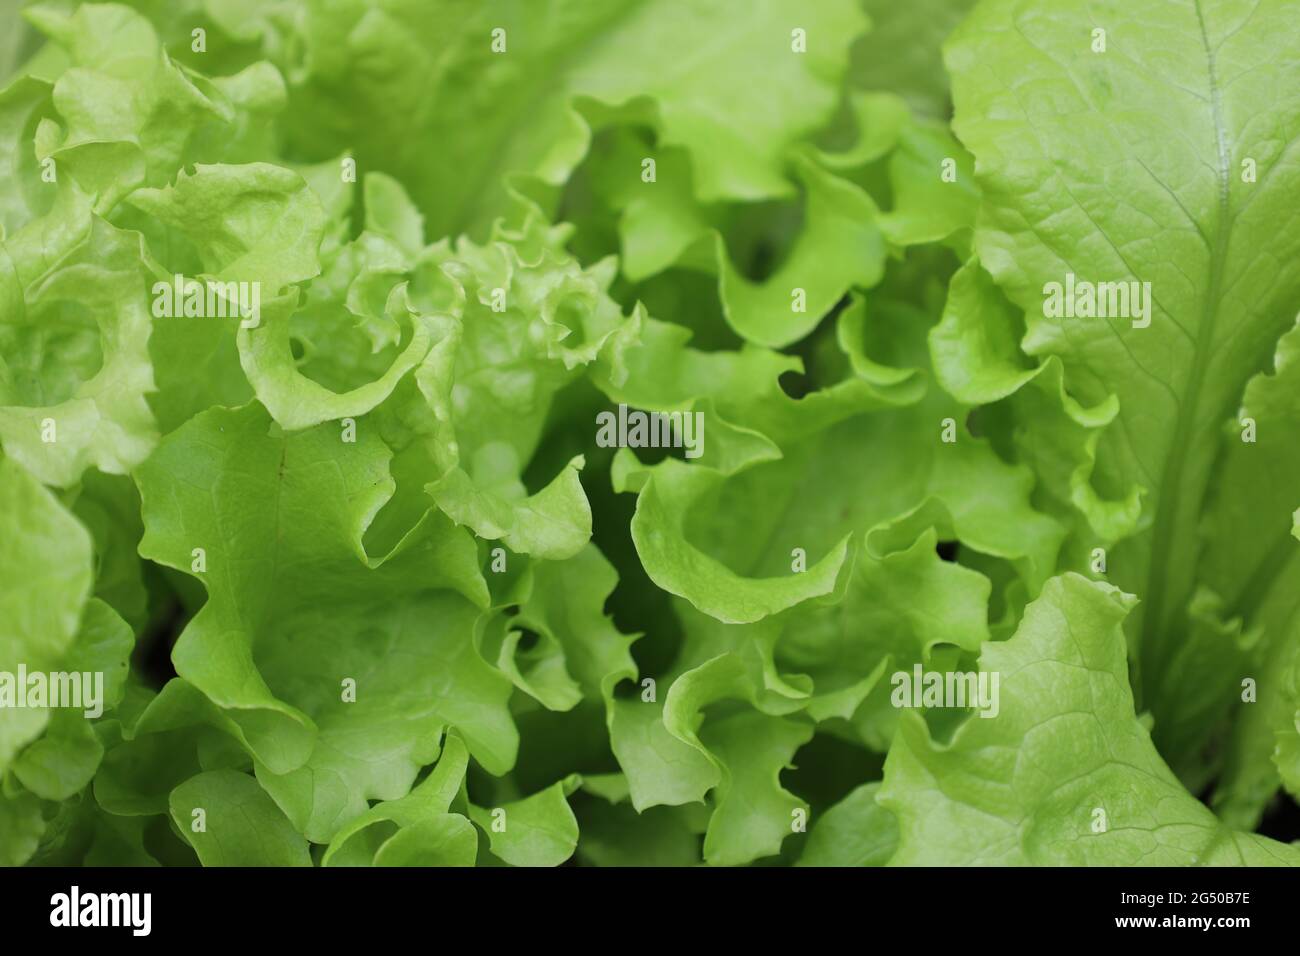 Bonn Germany June 2021 young plucking lettuce green oak leaf as image-filling close-up Stock Photo